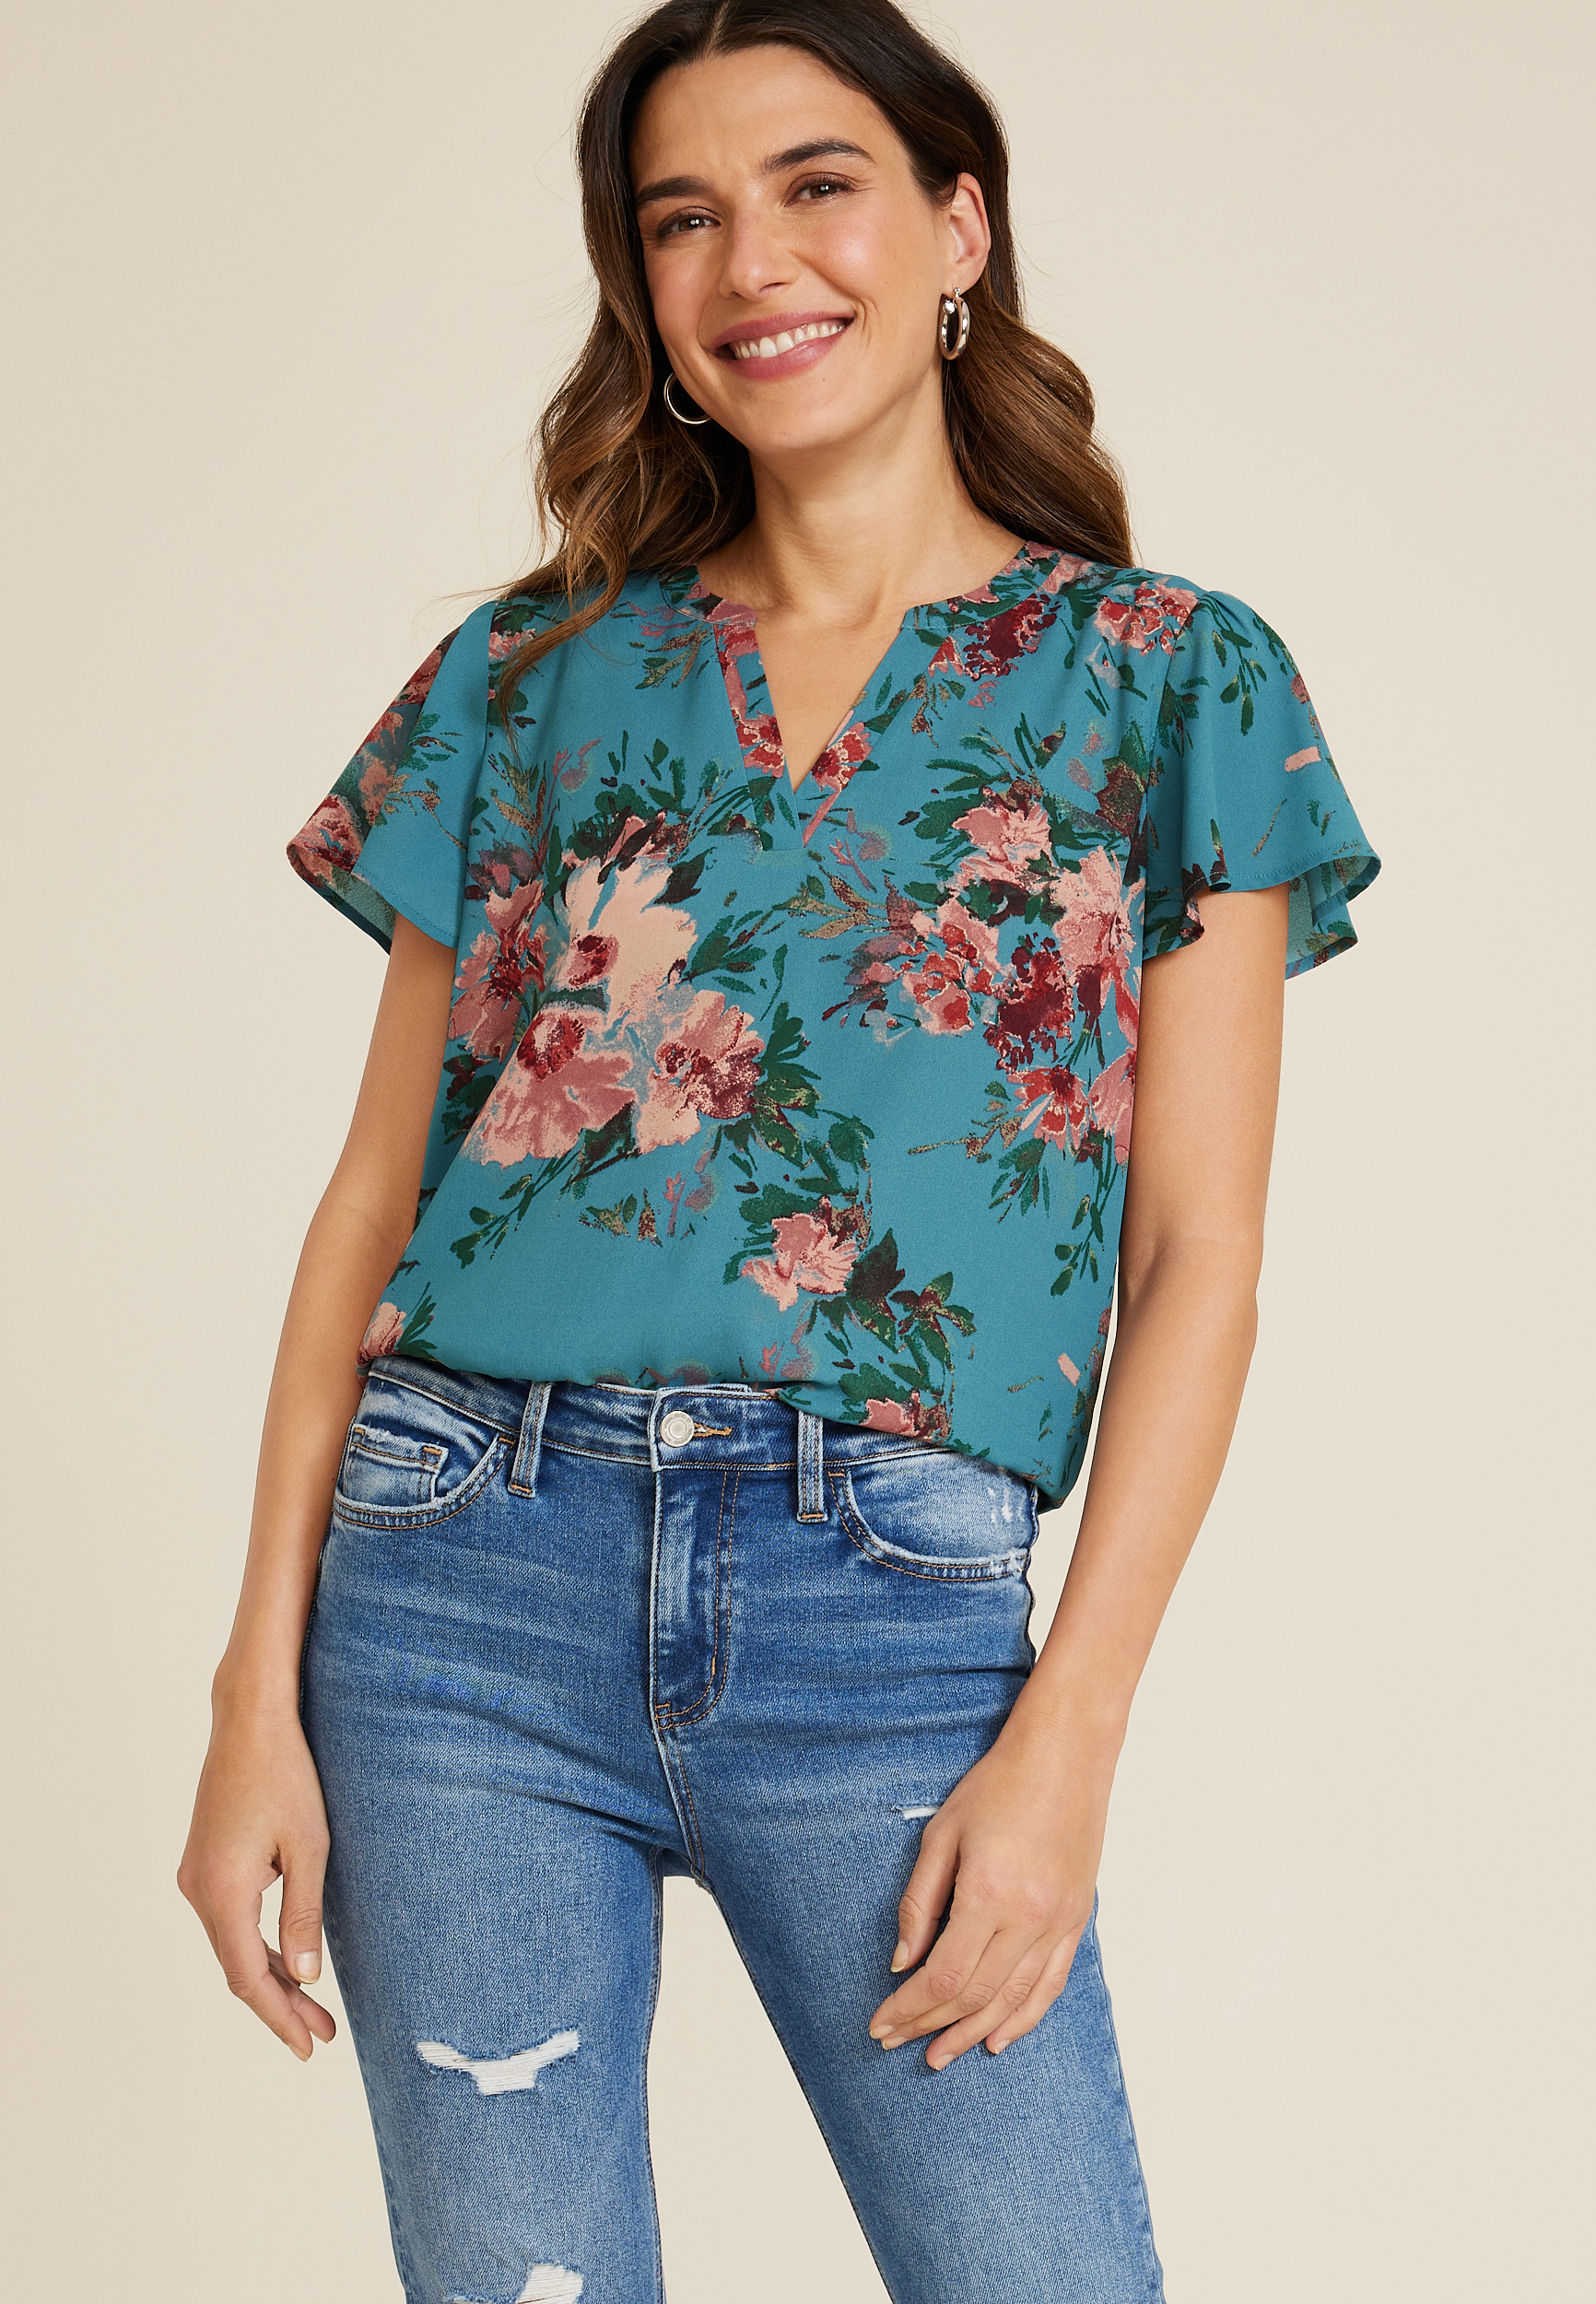 Youngnet,1 Cent Items,Cheap Flowy Shirts Women,5 Dollar,Women tee Tops,80 s  Outfits for Women,All dealssummer Tops with Short Sleeves,Basic Casual Tops,Returns  and refunds, at  Women's Clothing store